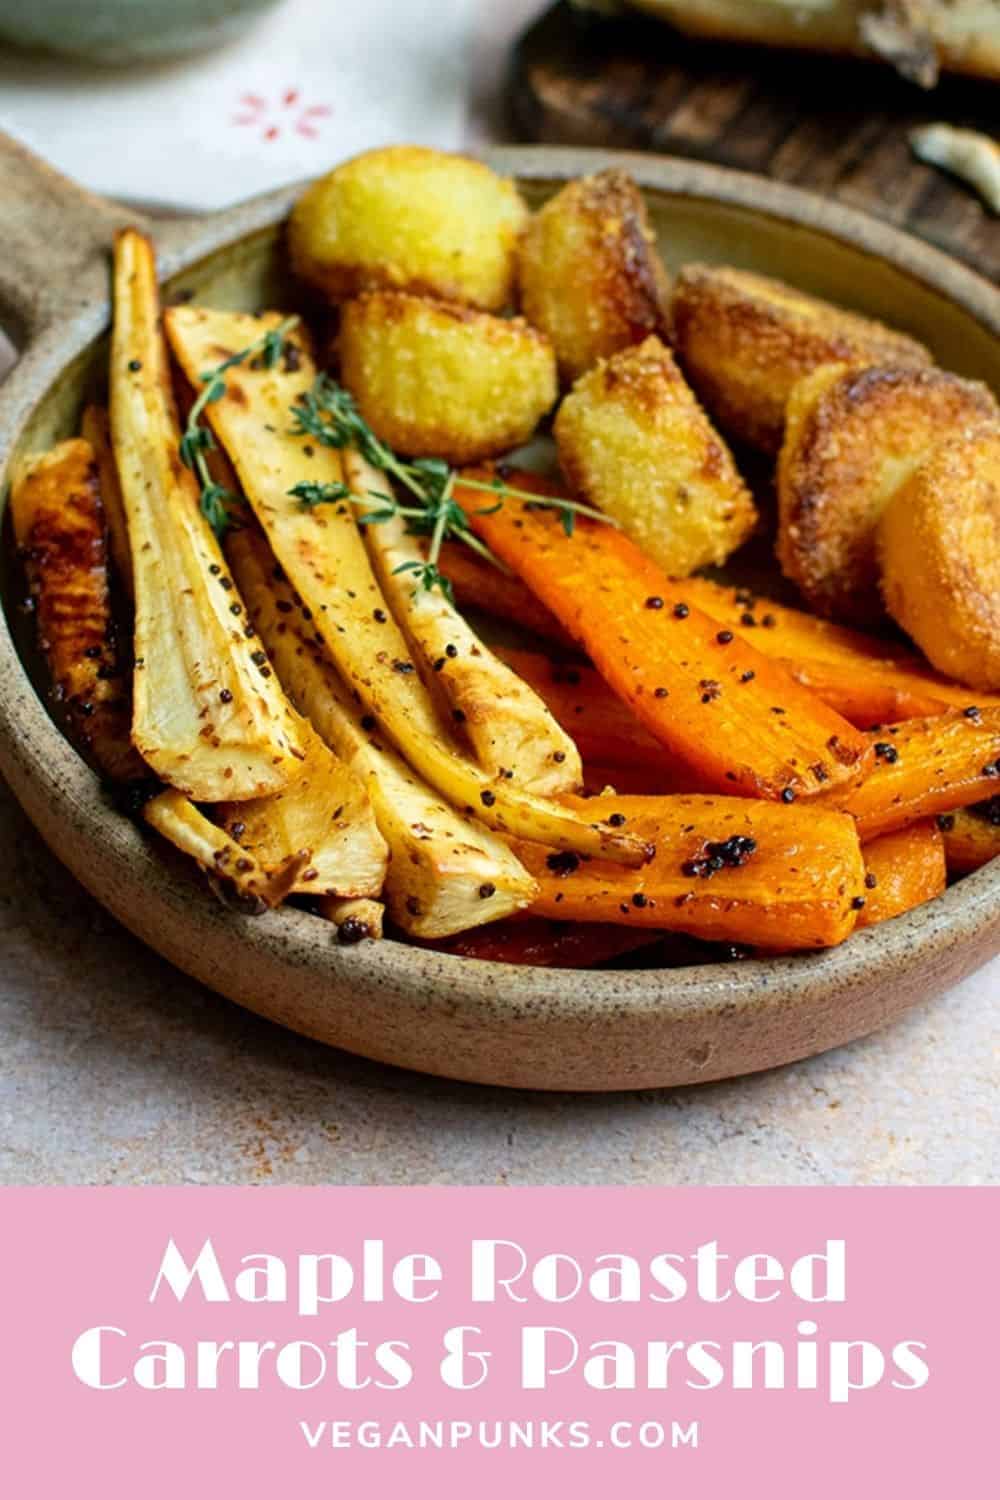 A Pinterest image titled Maple Roasted Carrots & Parsnips. A stoneware bowl is filled with carrots and parsnips. The veg is golden brown and has a few mustard seeds stuck to them.